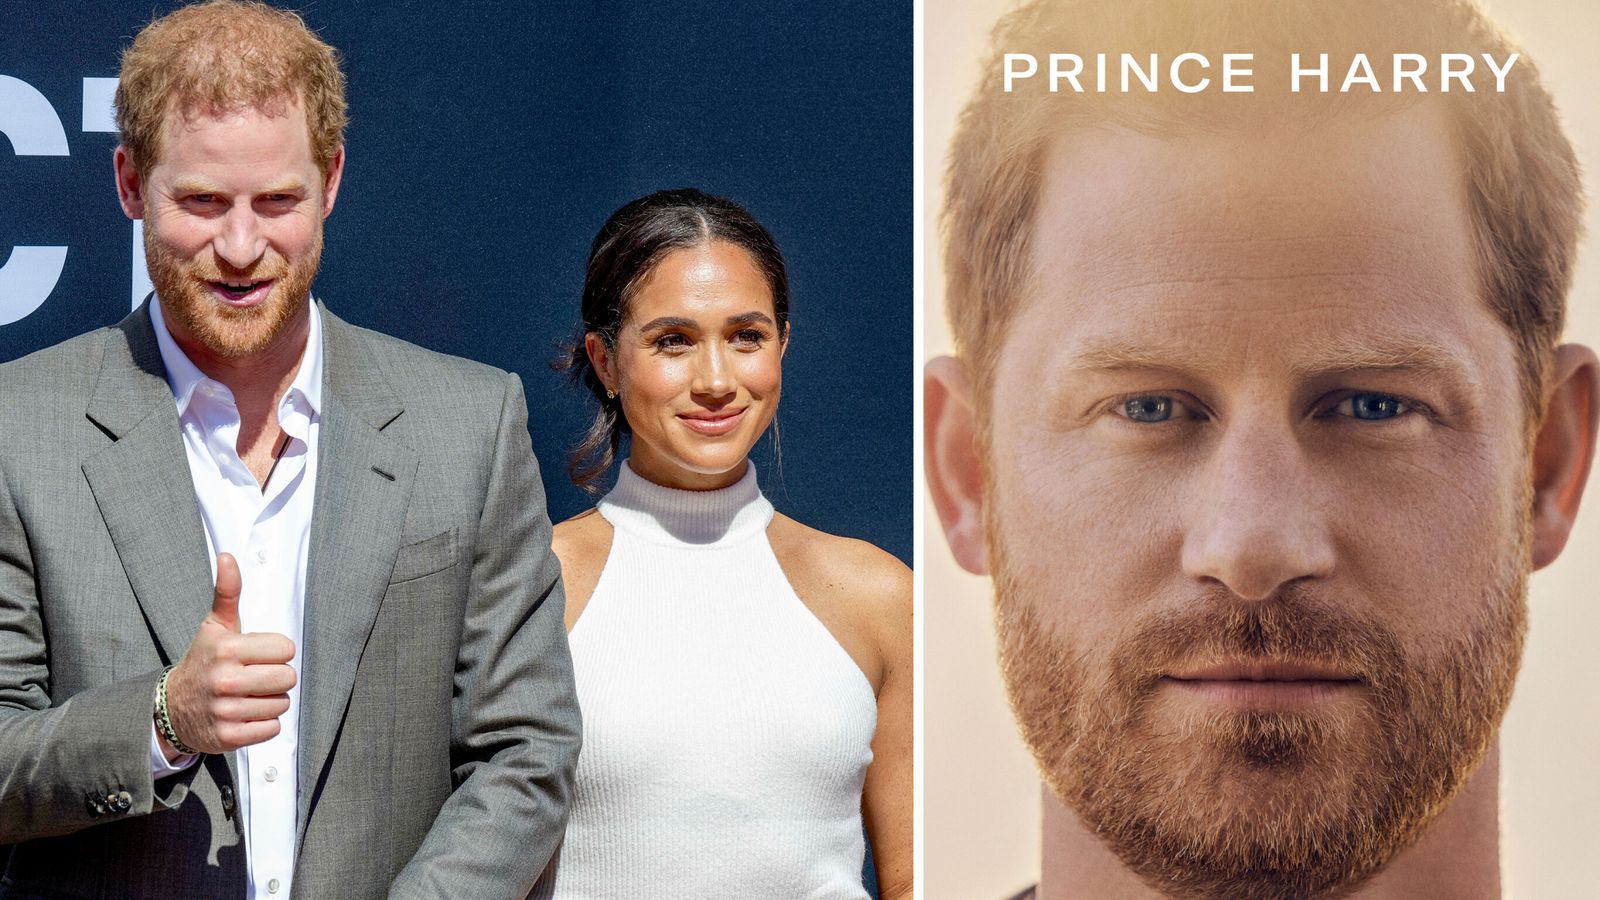 Spare: What to expect from Prince Harry's highly anticipated memoir